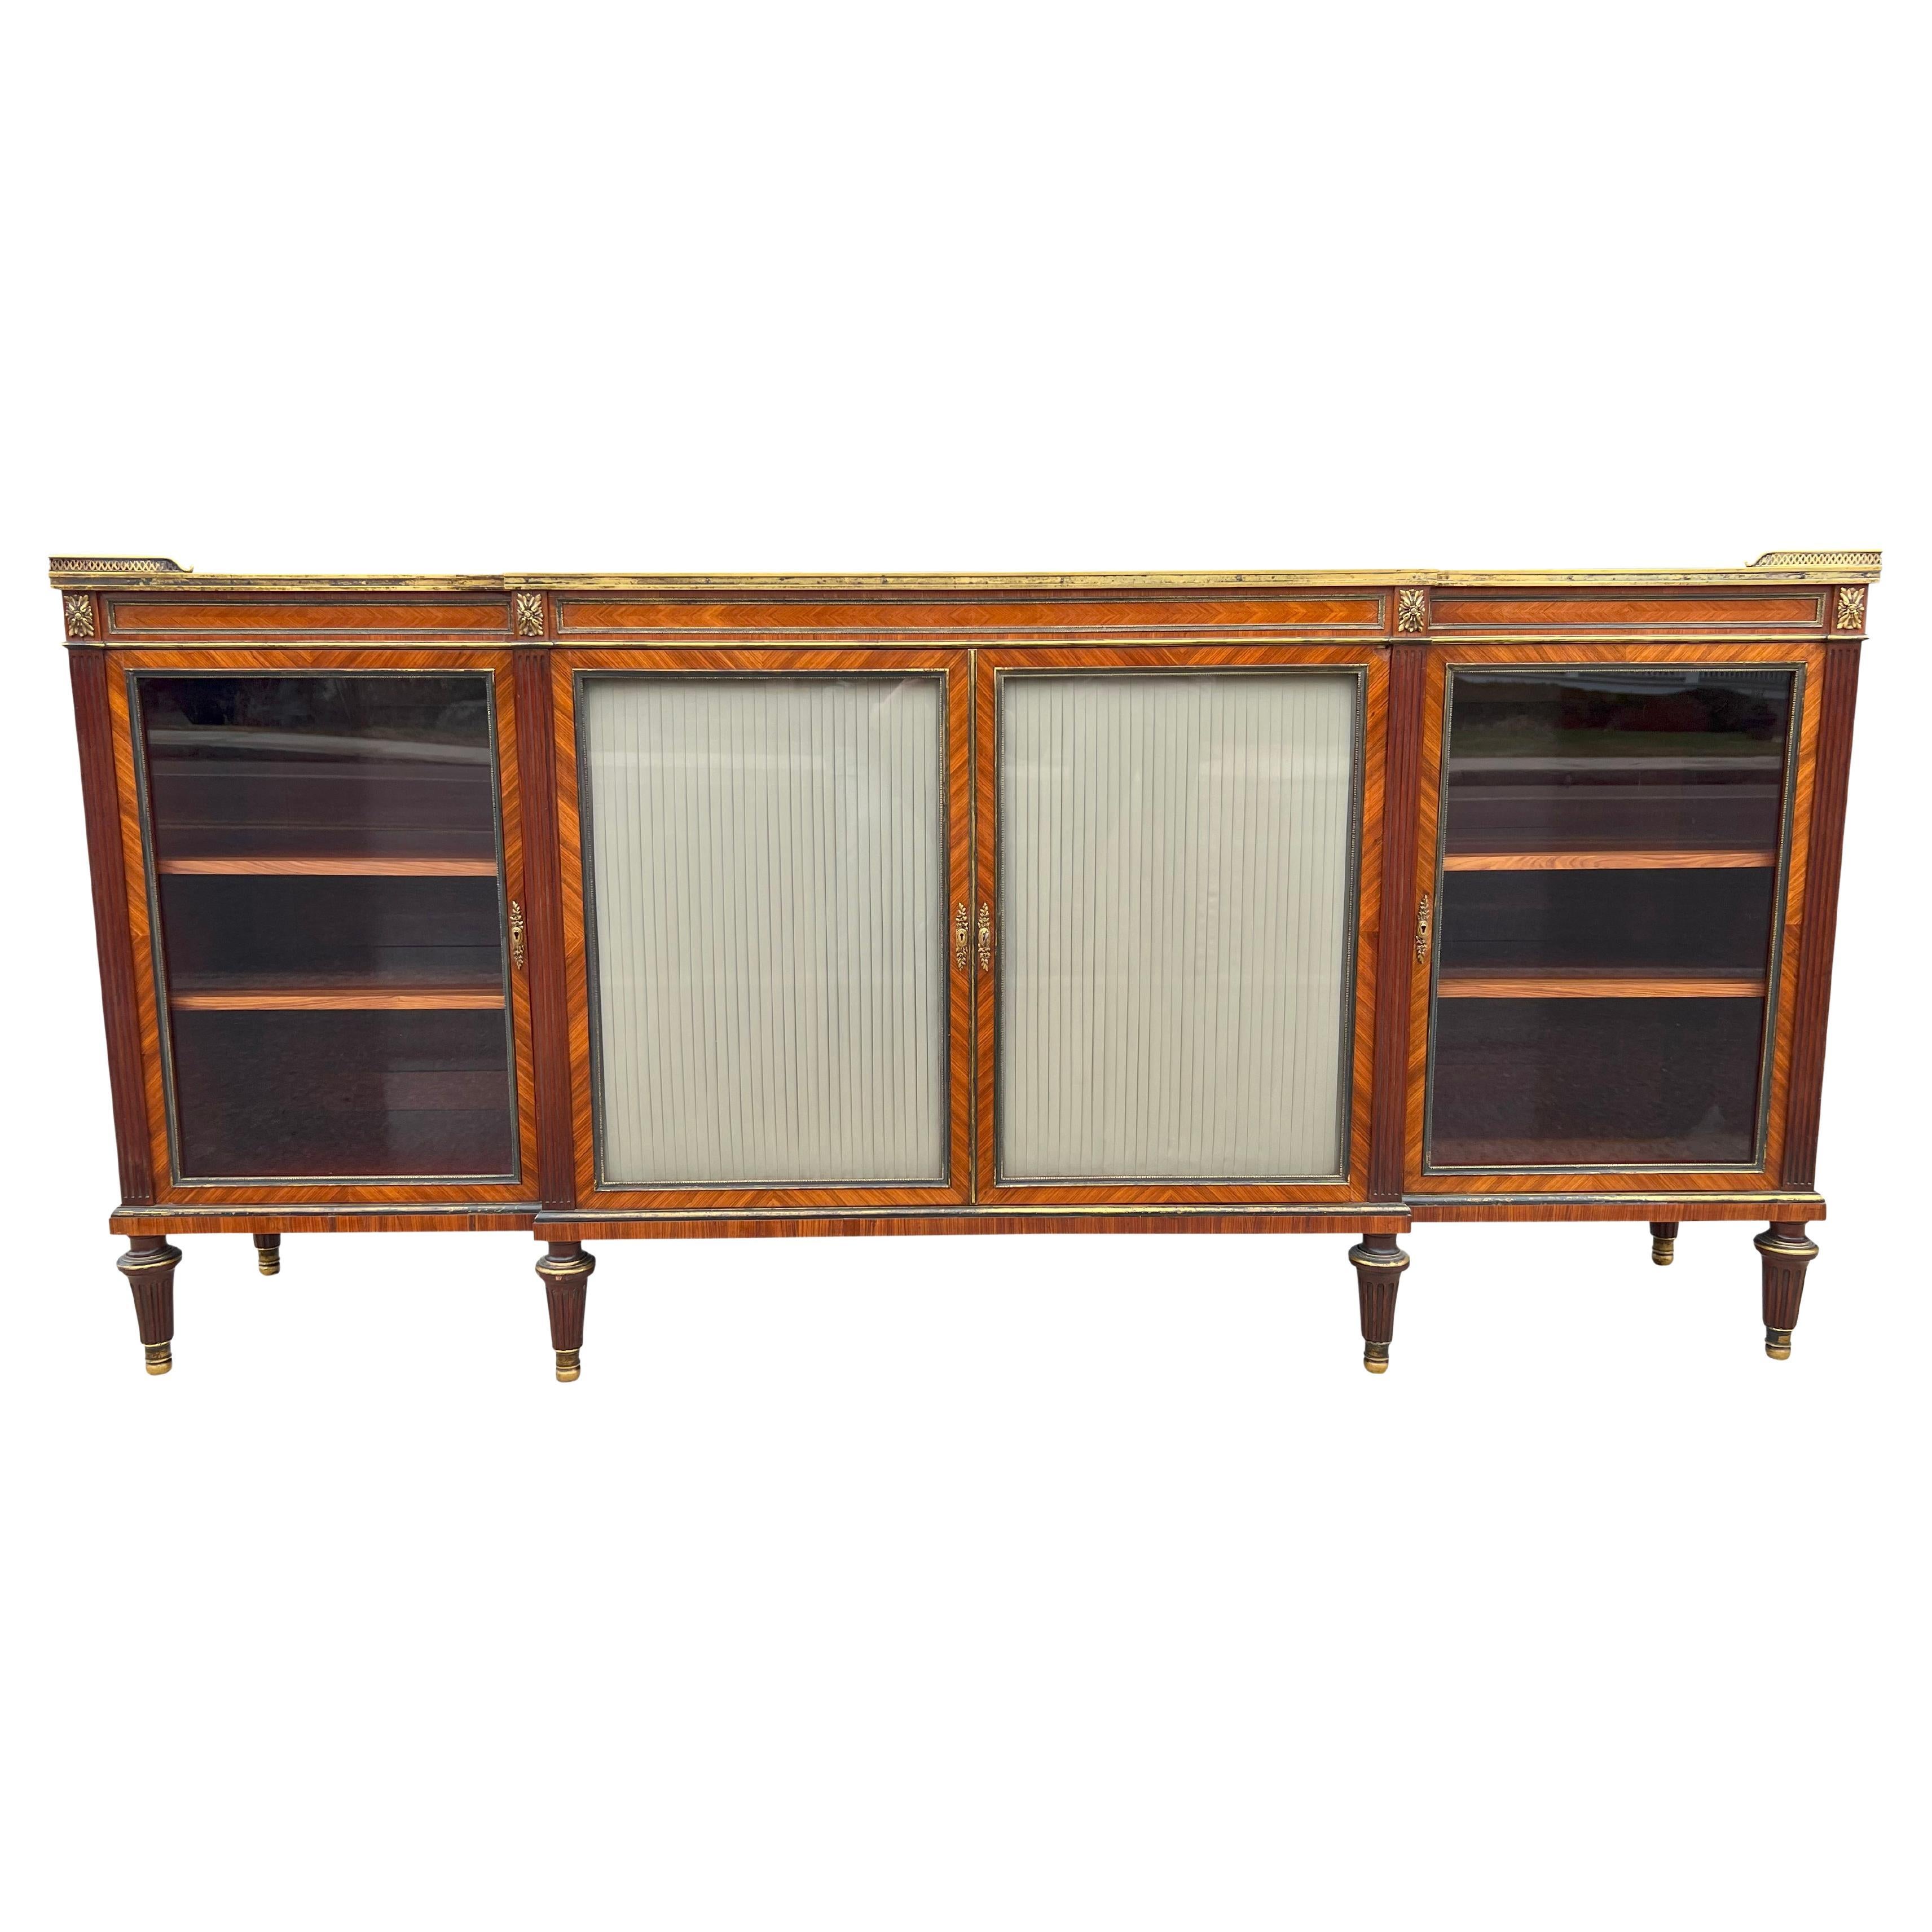 The best quality of construction. With rectangular breakfront form top with wonderfully figured kingwood with a cast bronze edge. Over a pair of pleated silk lined beveled glass doors enclosing shelves flanked by a pair of beveled glazed doors.